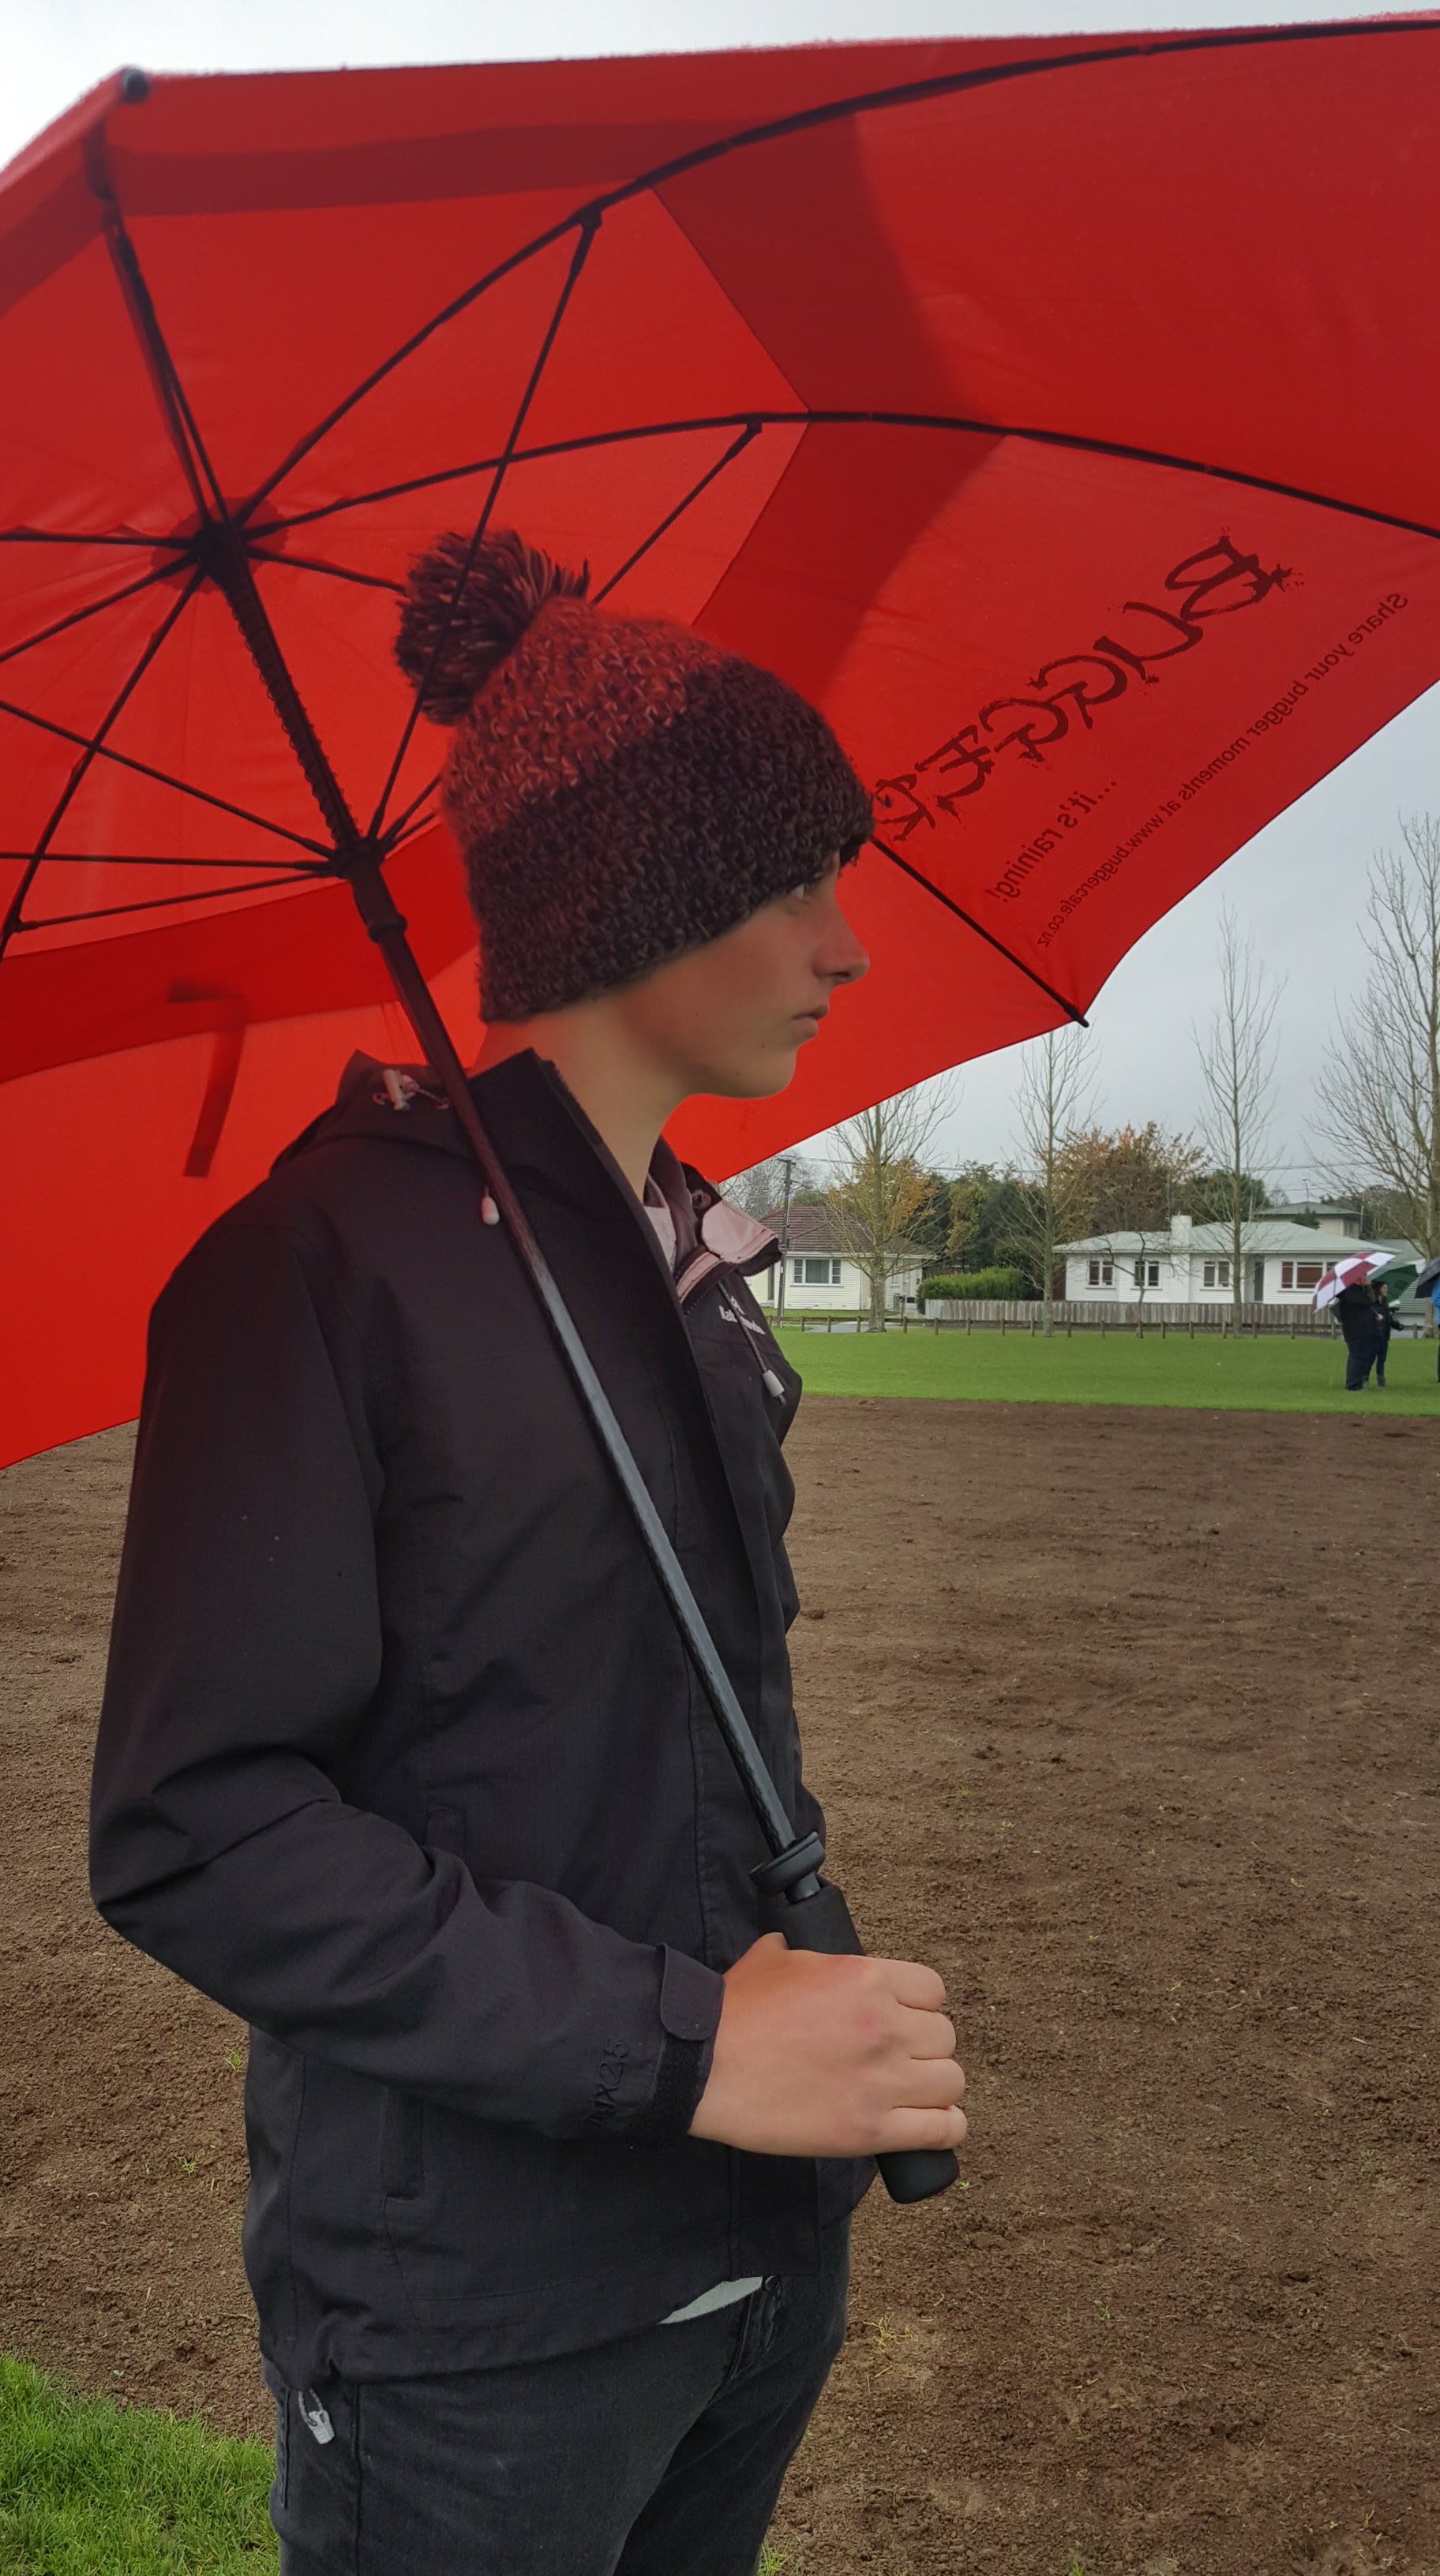 Boy wearing a black rain jacket and a woolly hat standing under a red umbrella